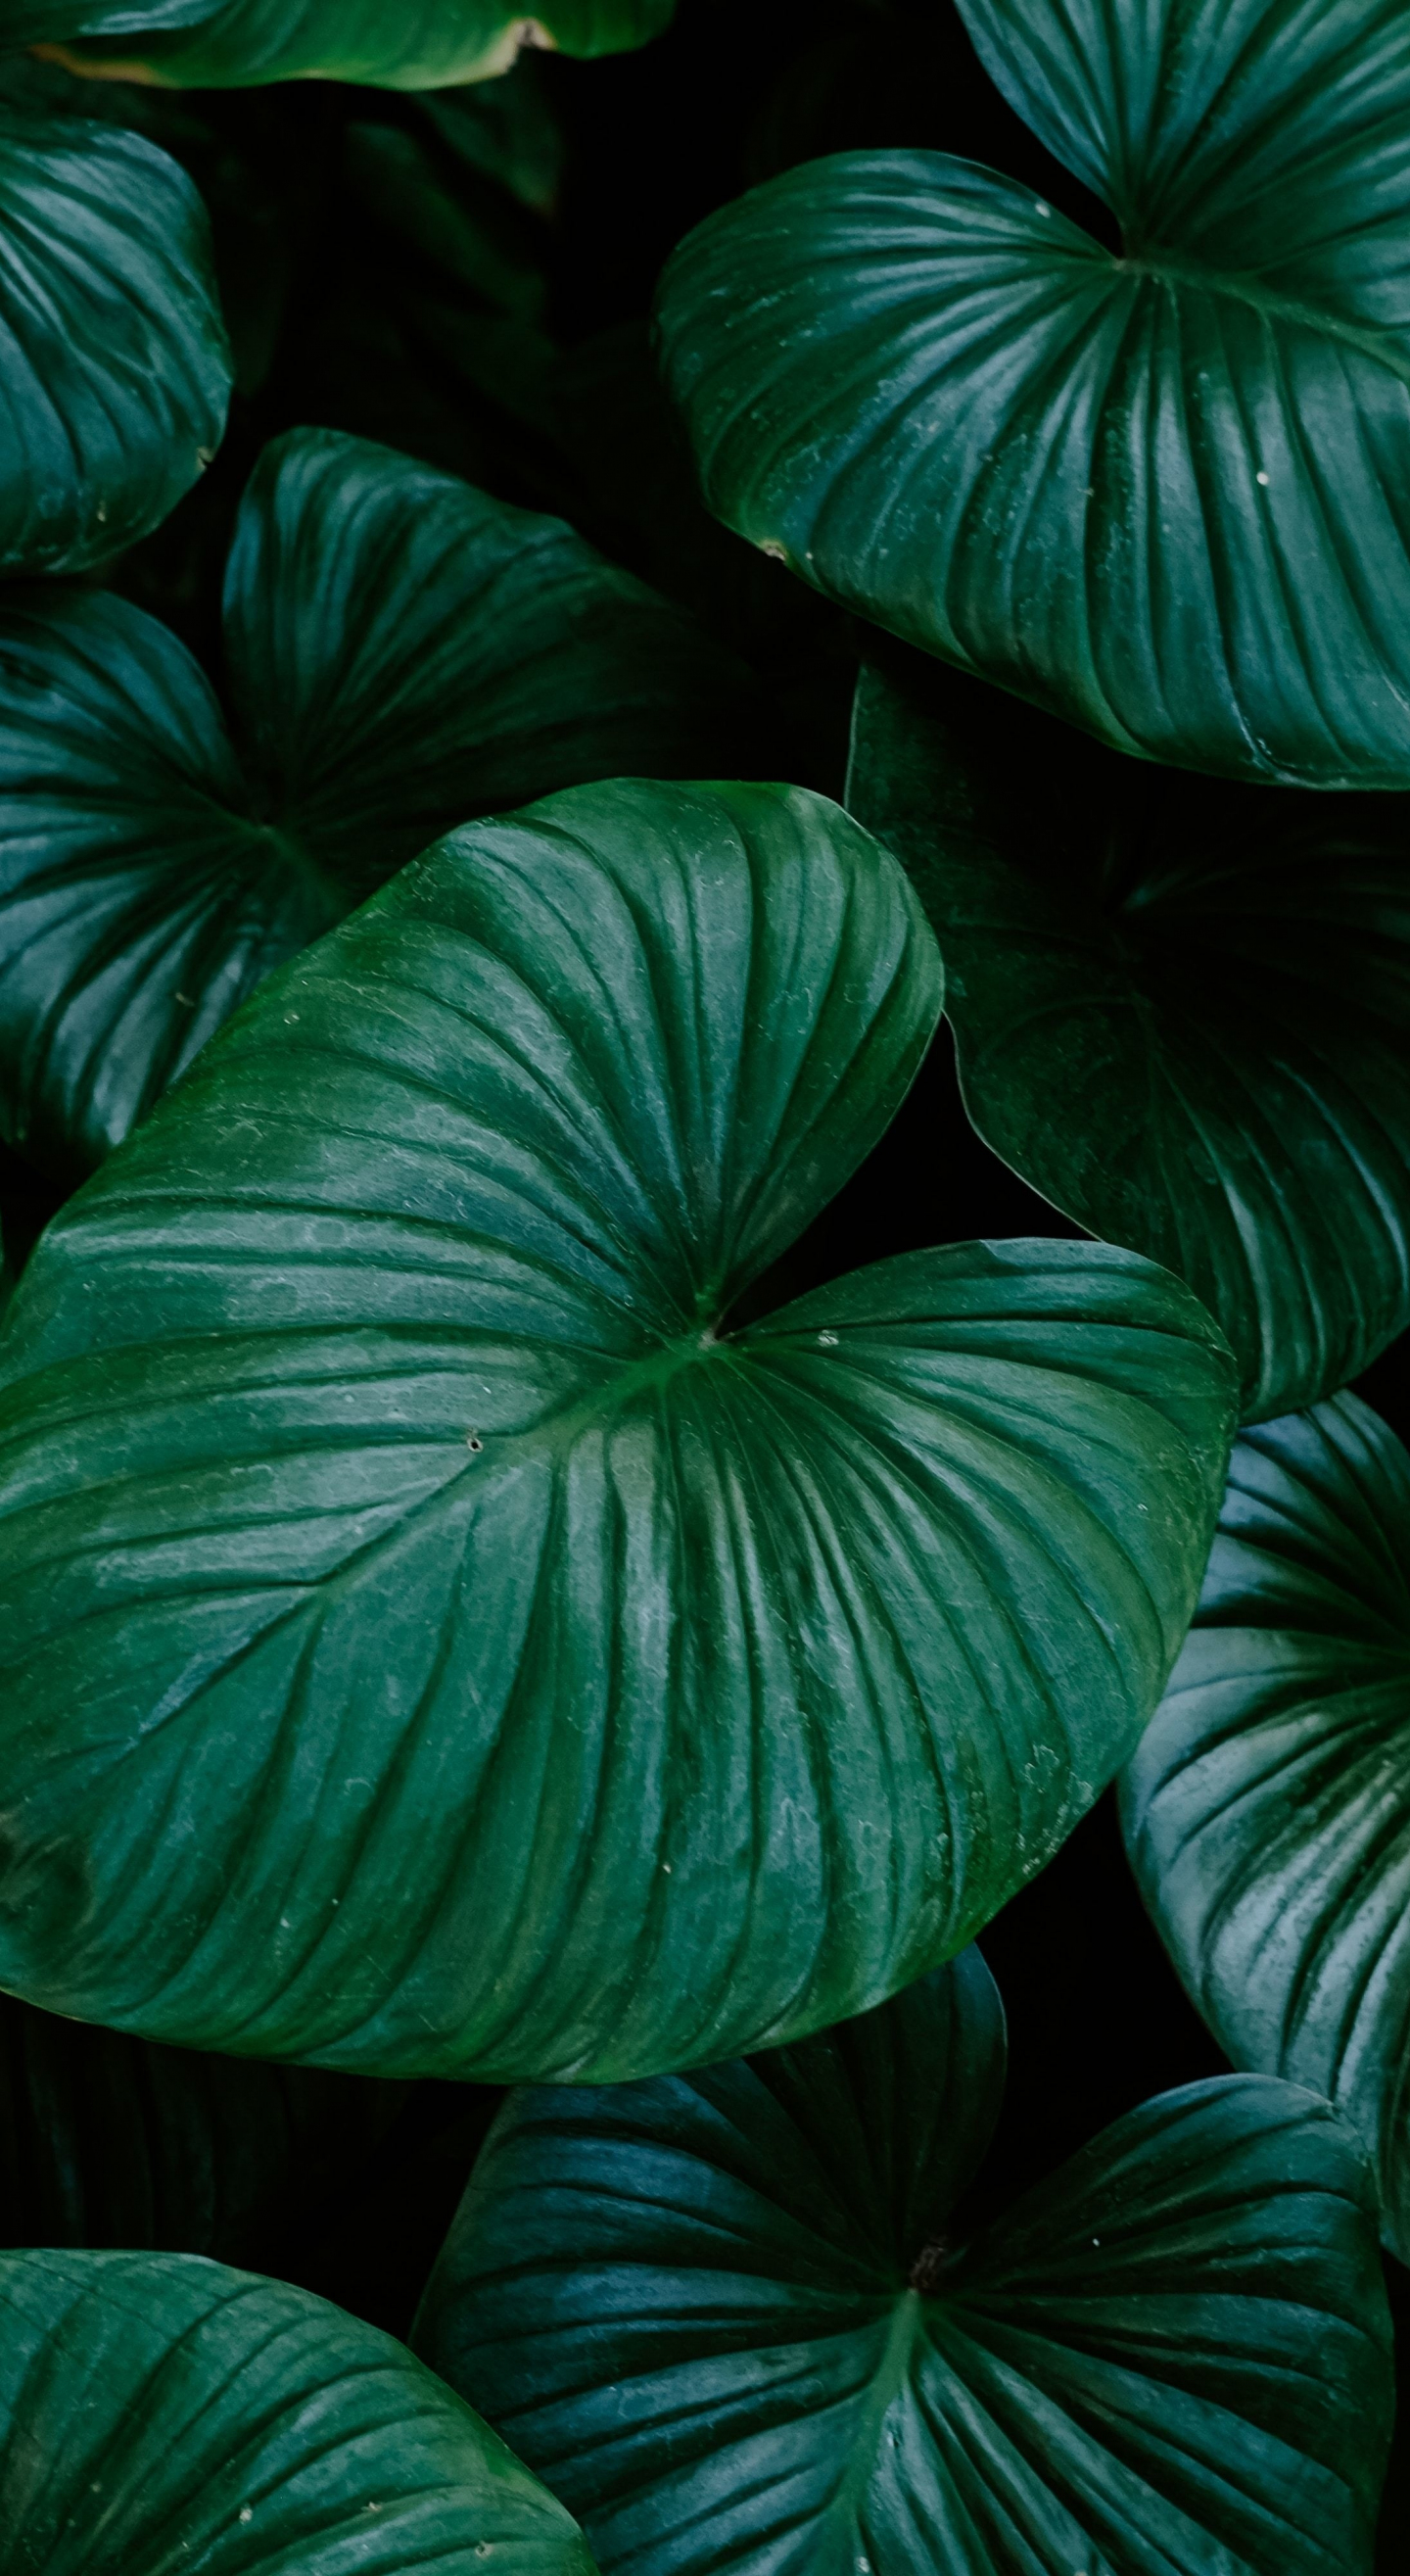 Download wallpaper 1440x2630 flora, green and bright leaf, big, samsung galaxy note 1440x2630 HD background, 22409